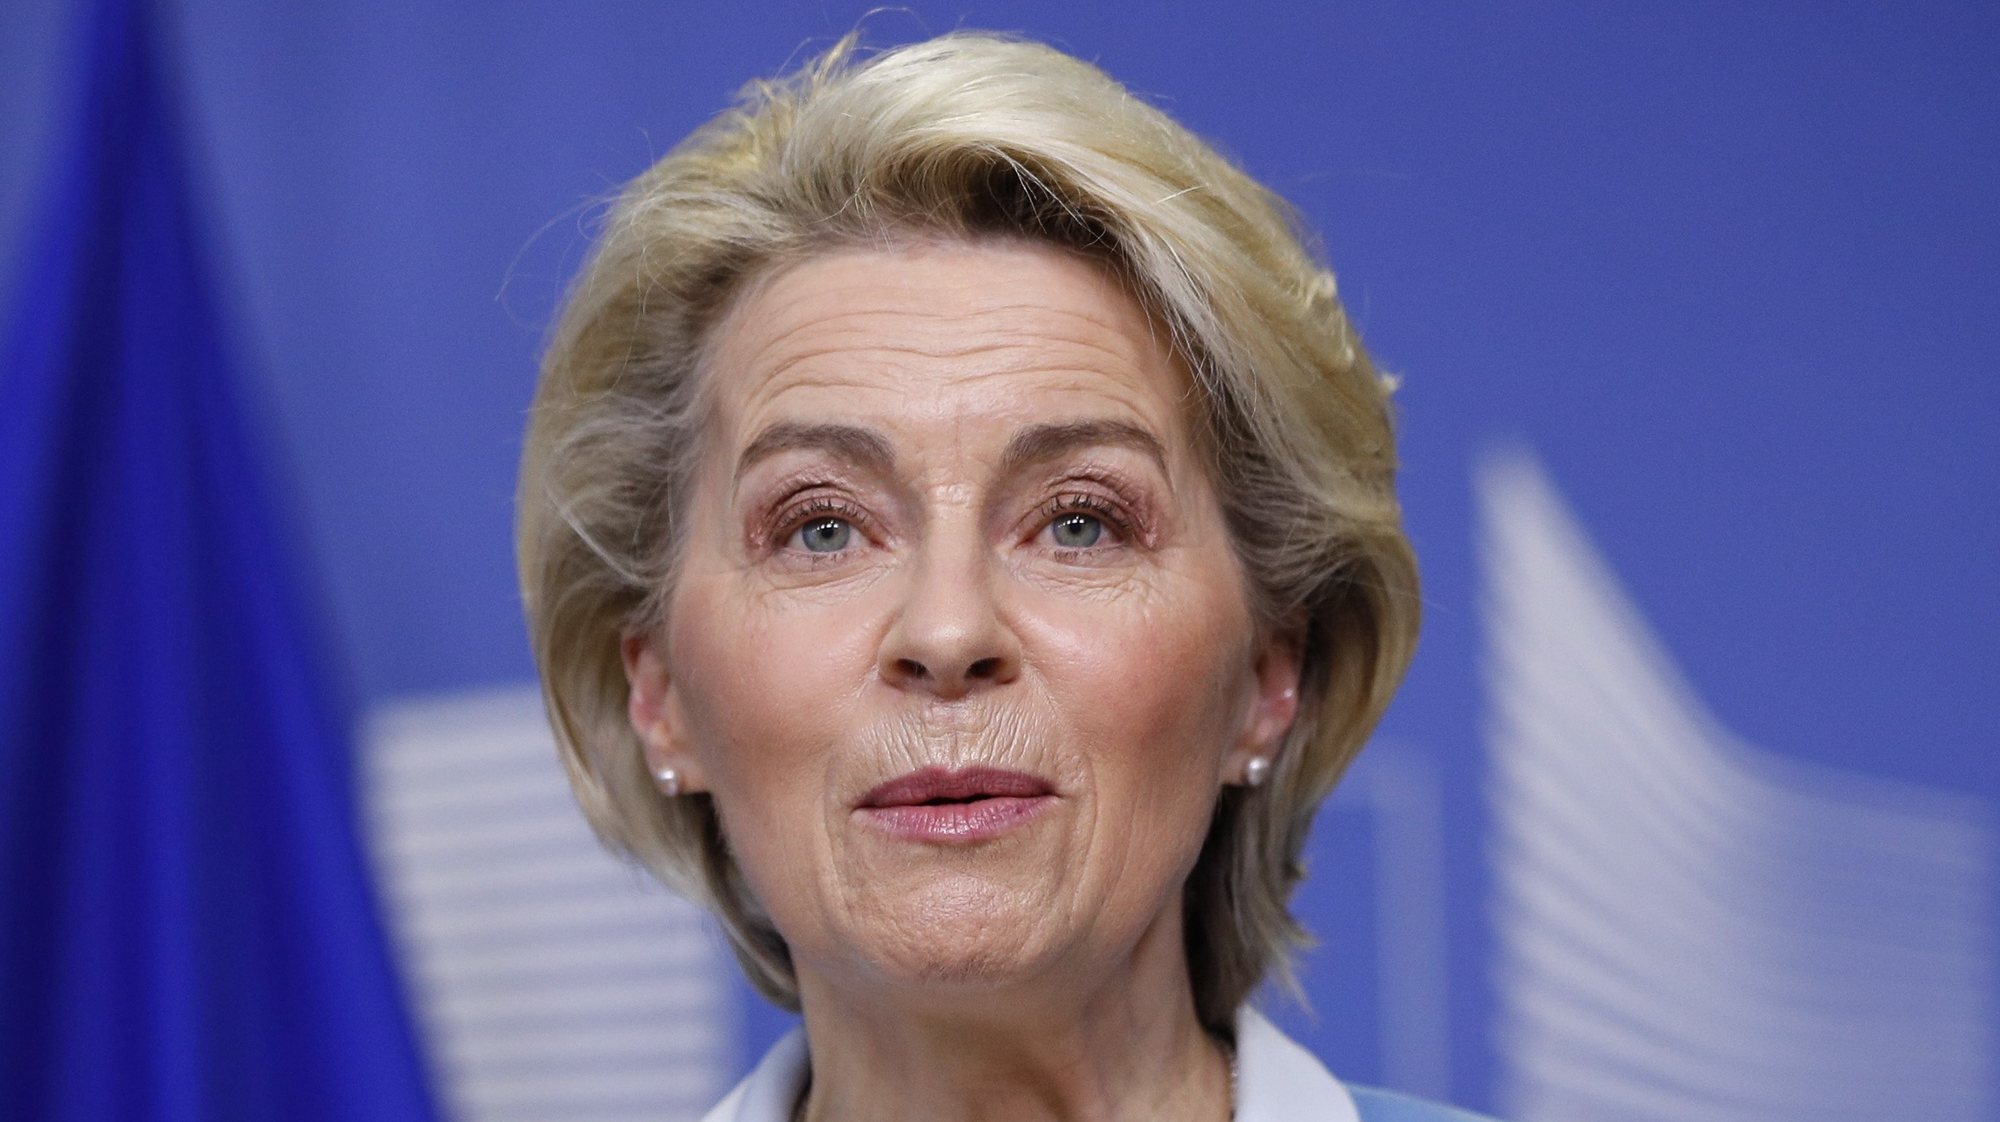 epa09755176 European Commission President Ursula von der Leyen speaks during a meet with Colombian President Duque in Brussels, Belgium, 14 February 2022. Duque is in Brussels for visits to EU institutions and NATO.  EPA/JOHANNA GERON / POOL